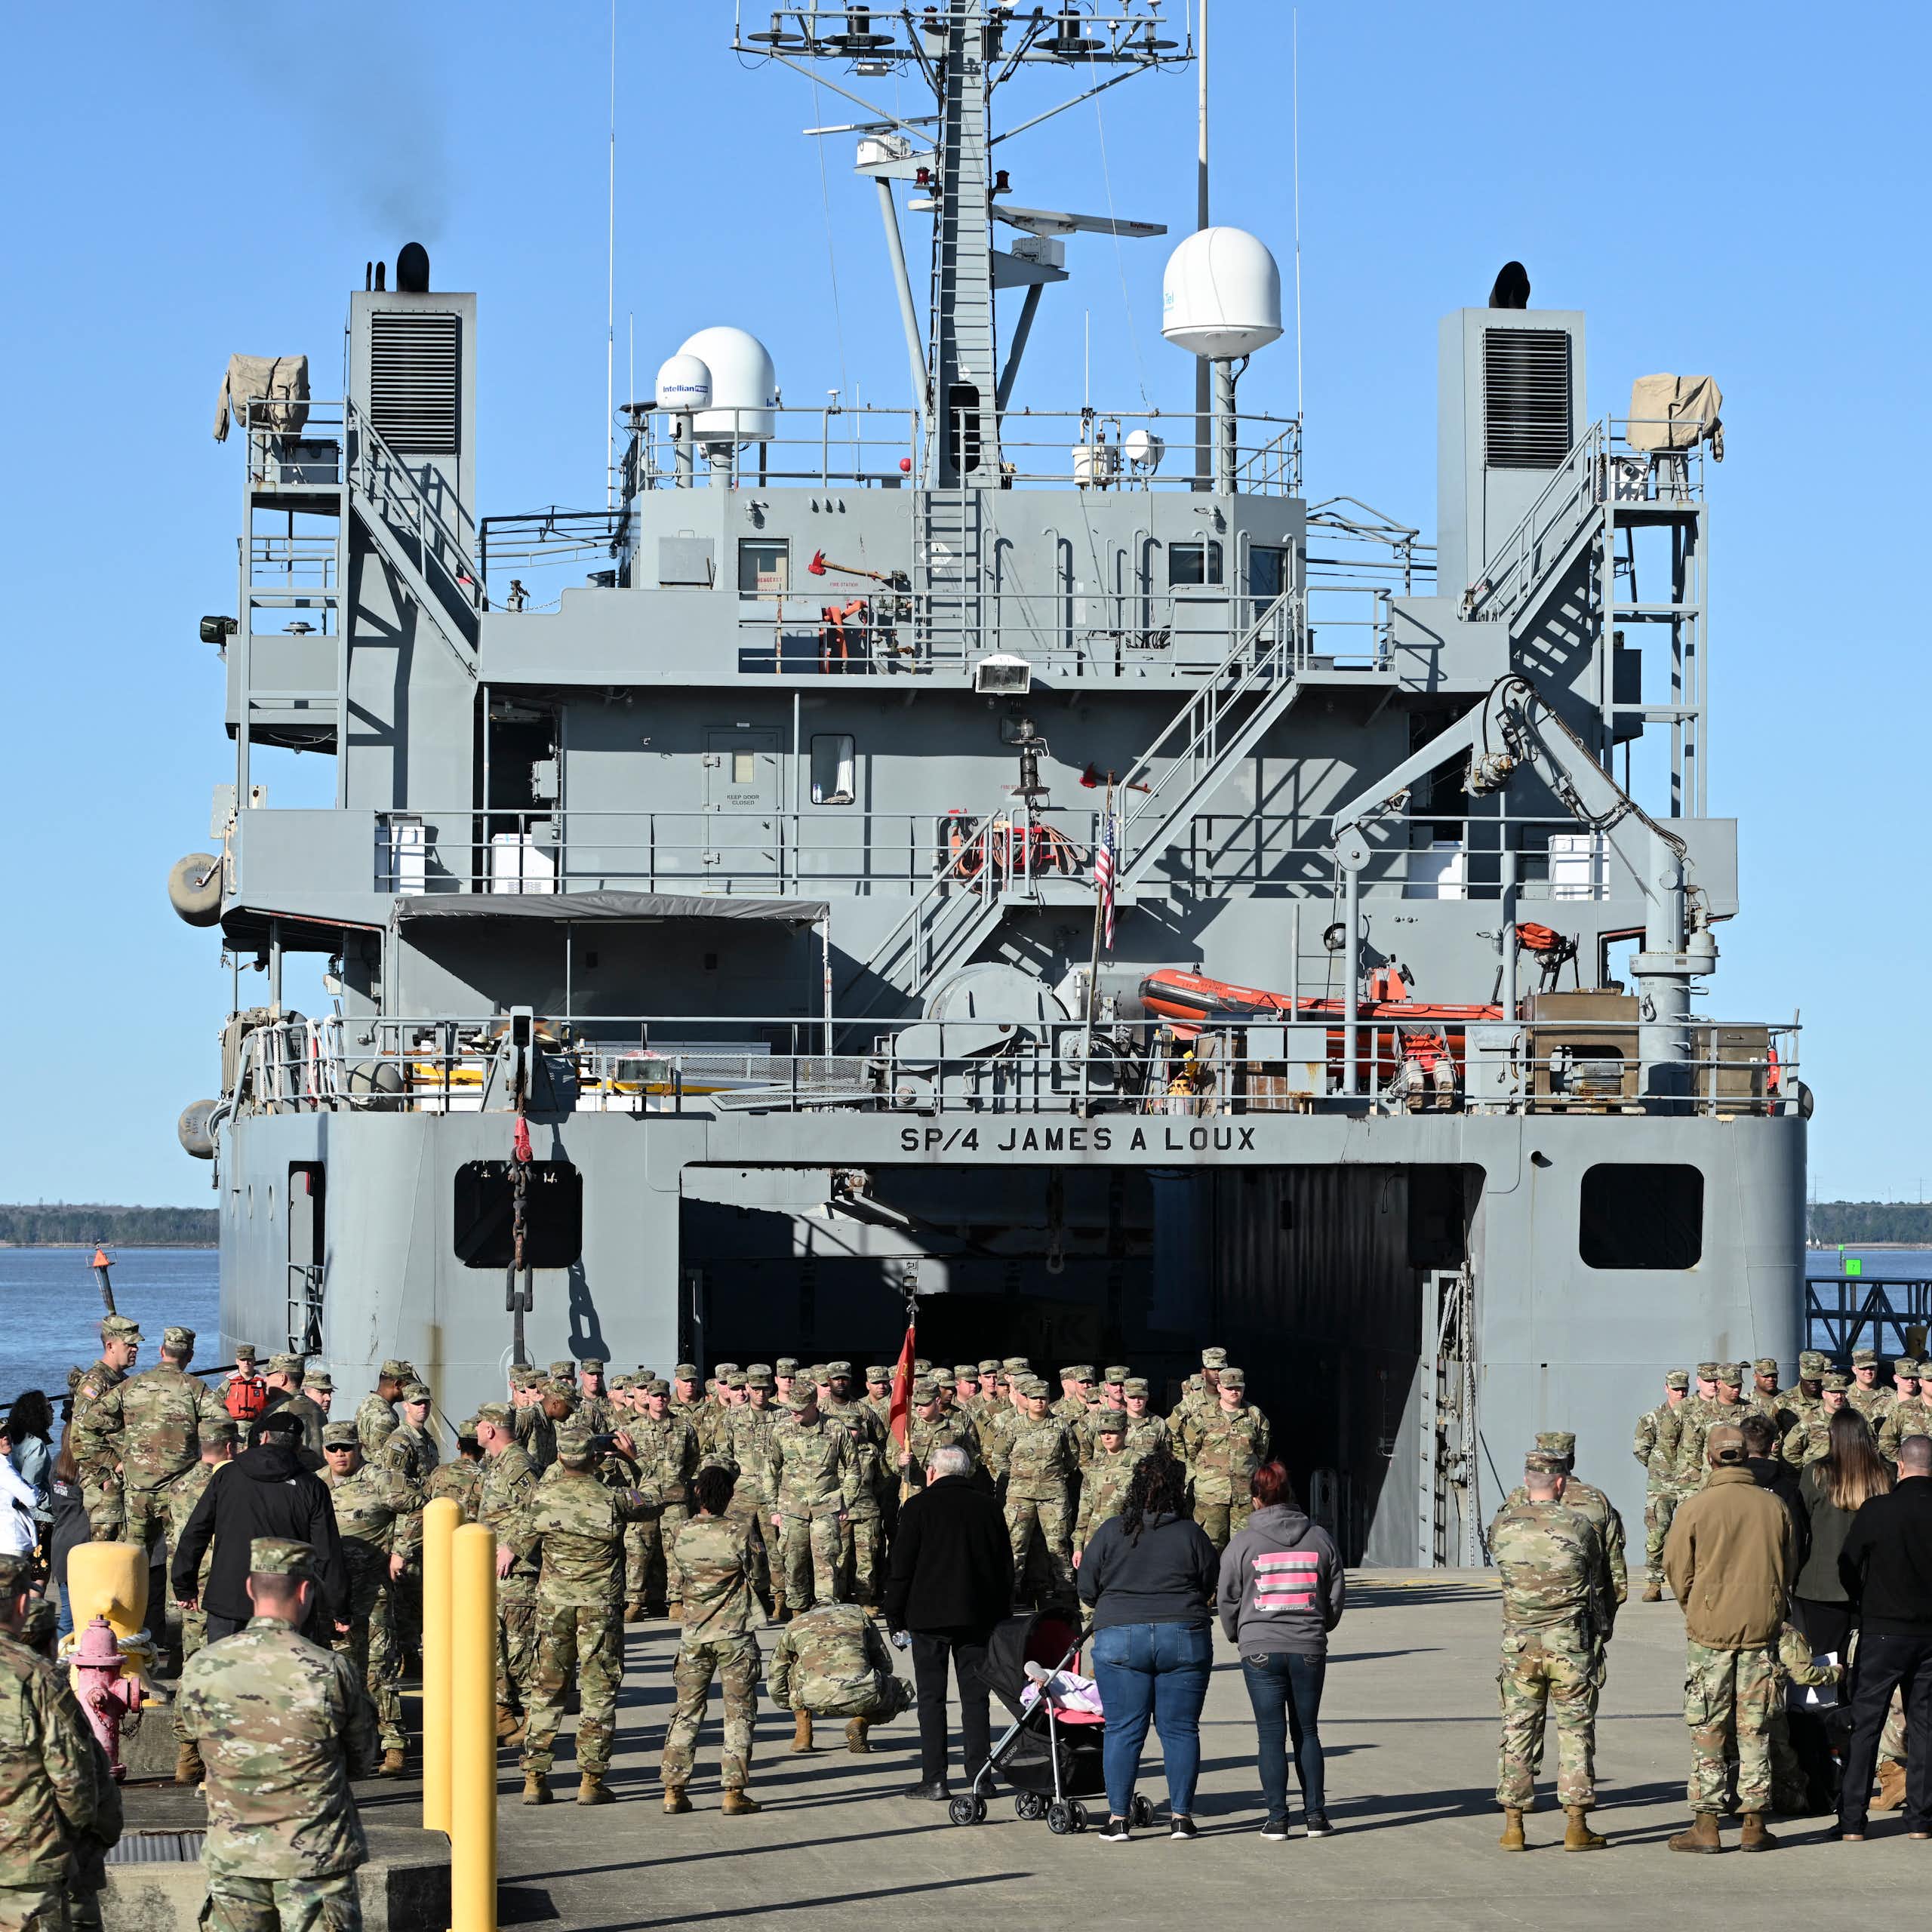 A large group of people in camouflage uniform stand on the platform of a big grey Navy boat.